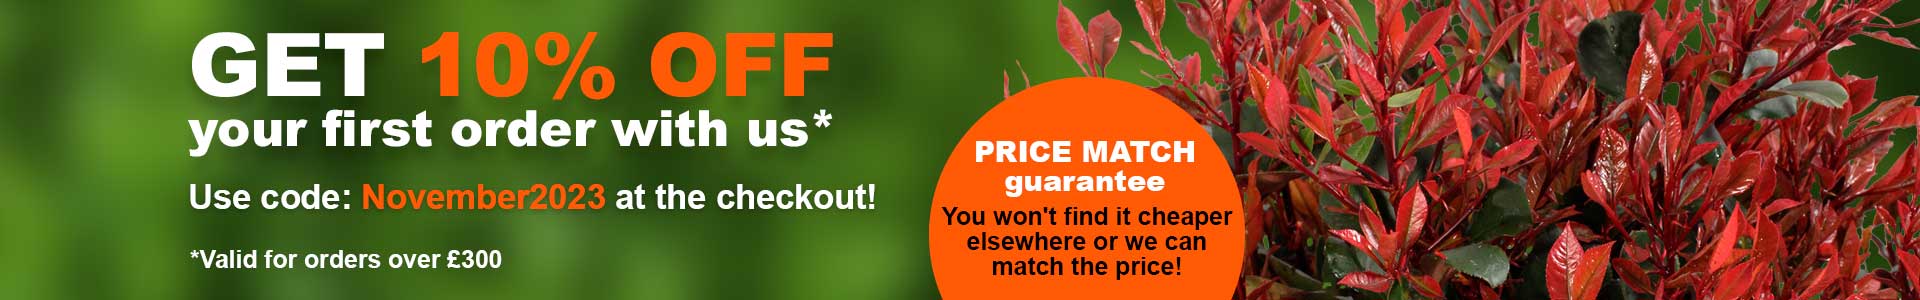 GET 10% OFF your first order with us*. Use code: November2023 at the checkout! PIRCE MATCH guarantee. You won't find it cheaper elsewhere or we can match the price!  *Valid for orders over £300